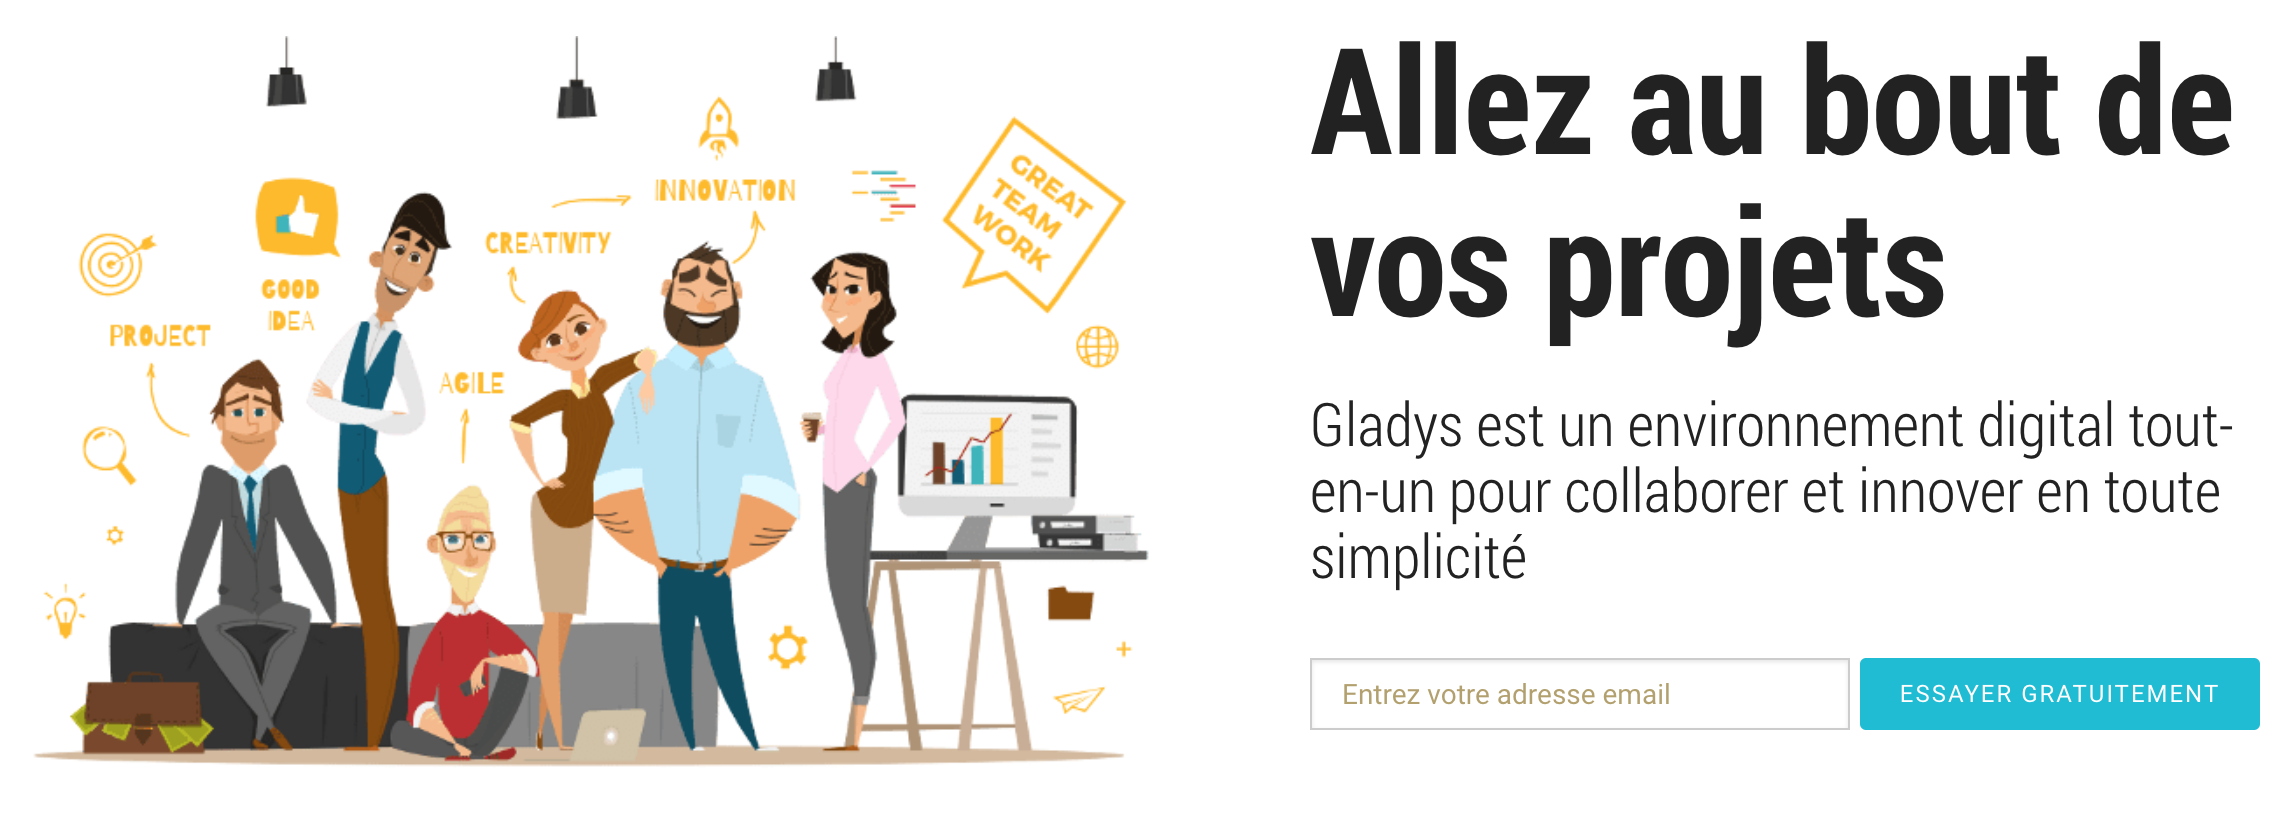 Review Gladys: A collaborative environment dedicated to project management - Appvizer